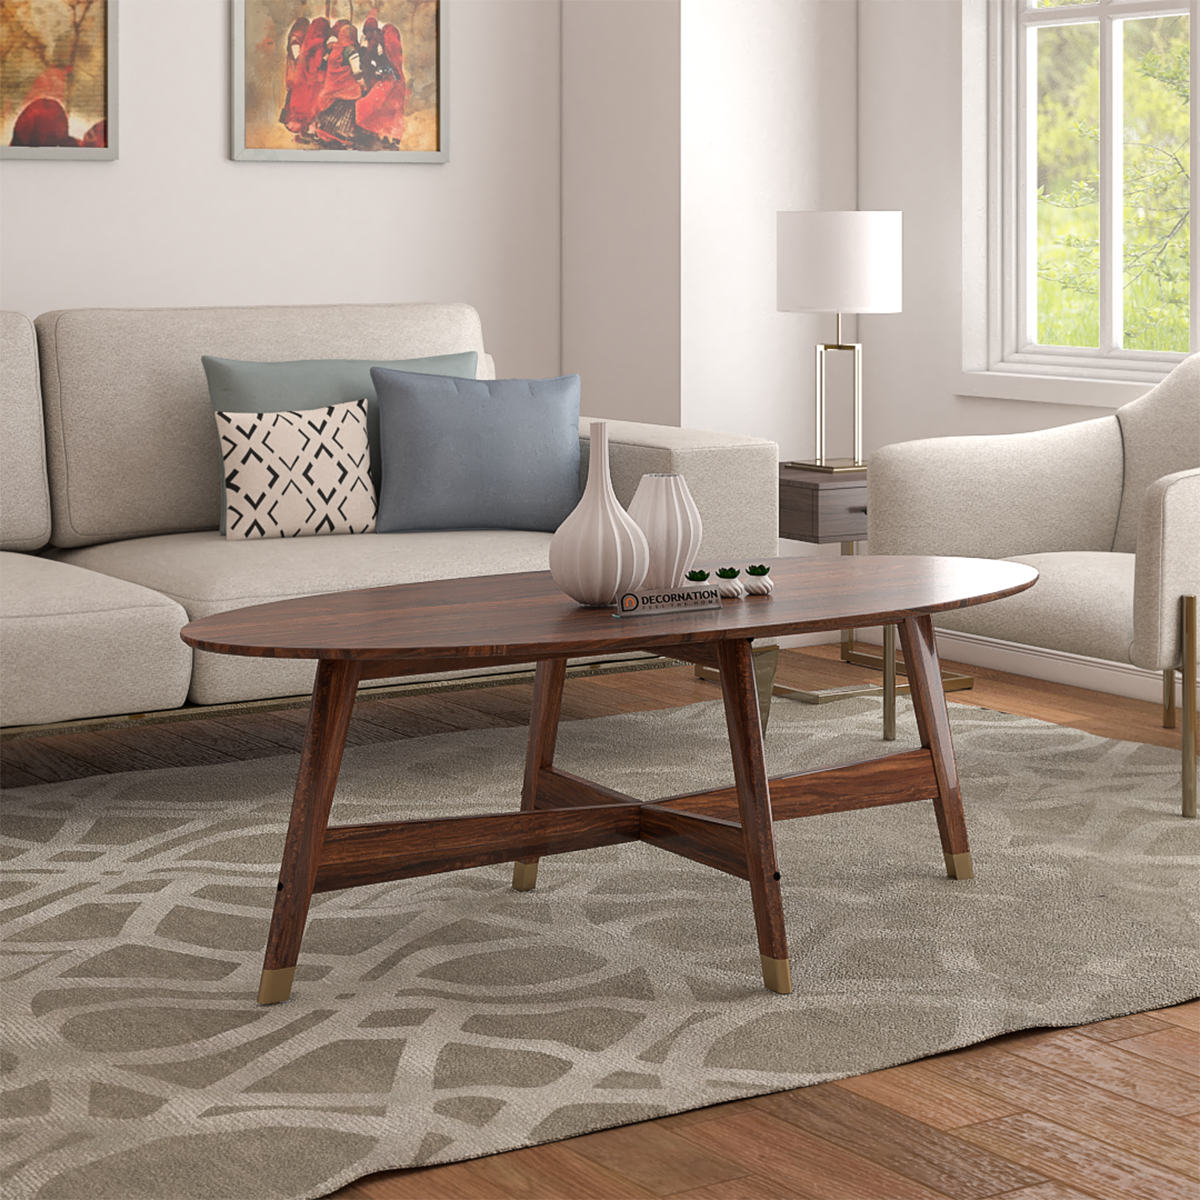 Birmingham Wooden Coffee Table – Natural Finish